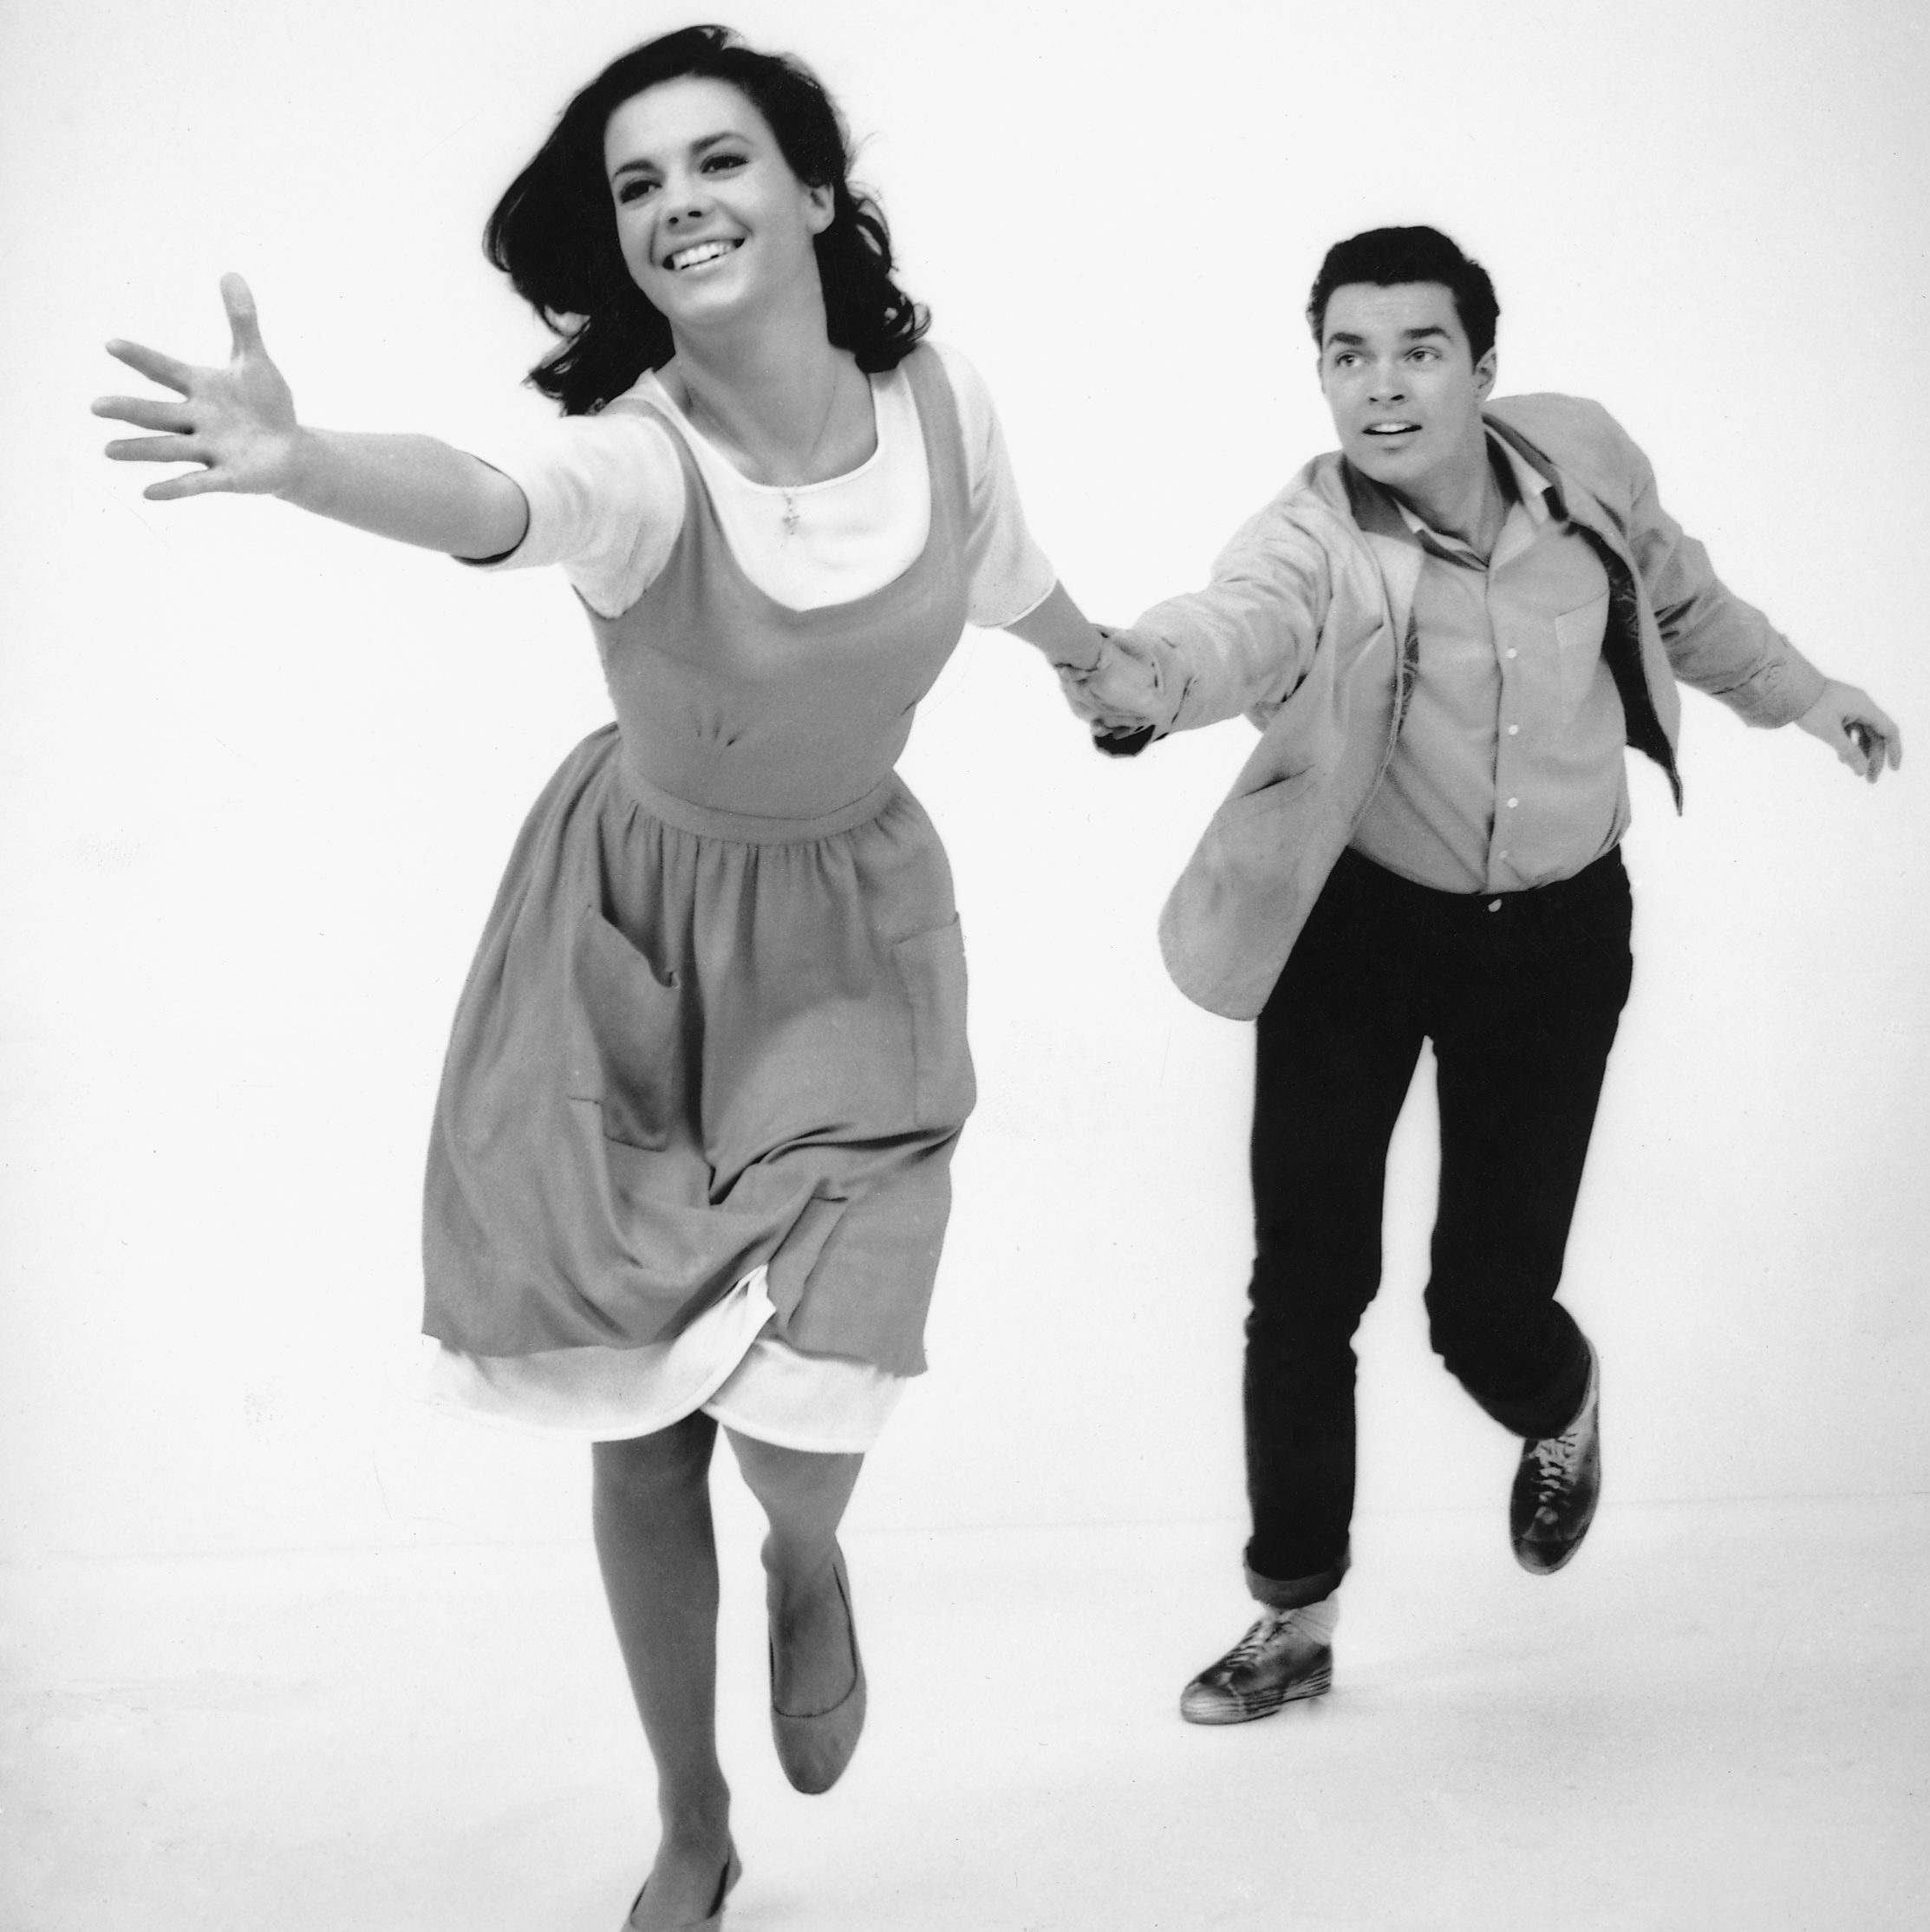 Natalie Wood and Richard Beymer in a publicity still for the original West Side Story, 1961